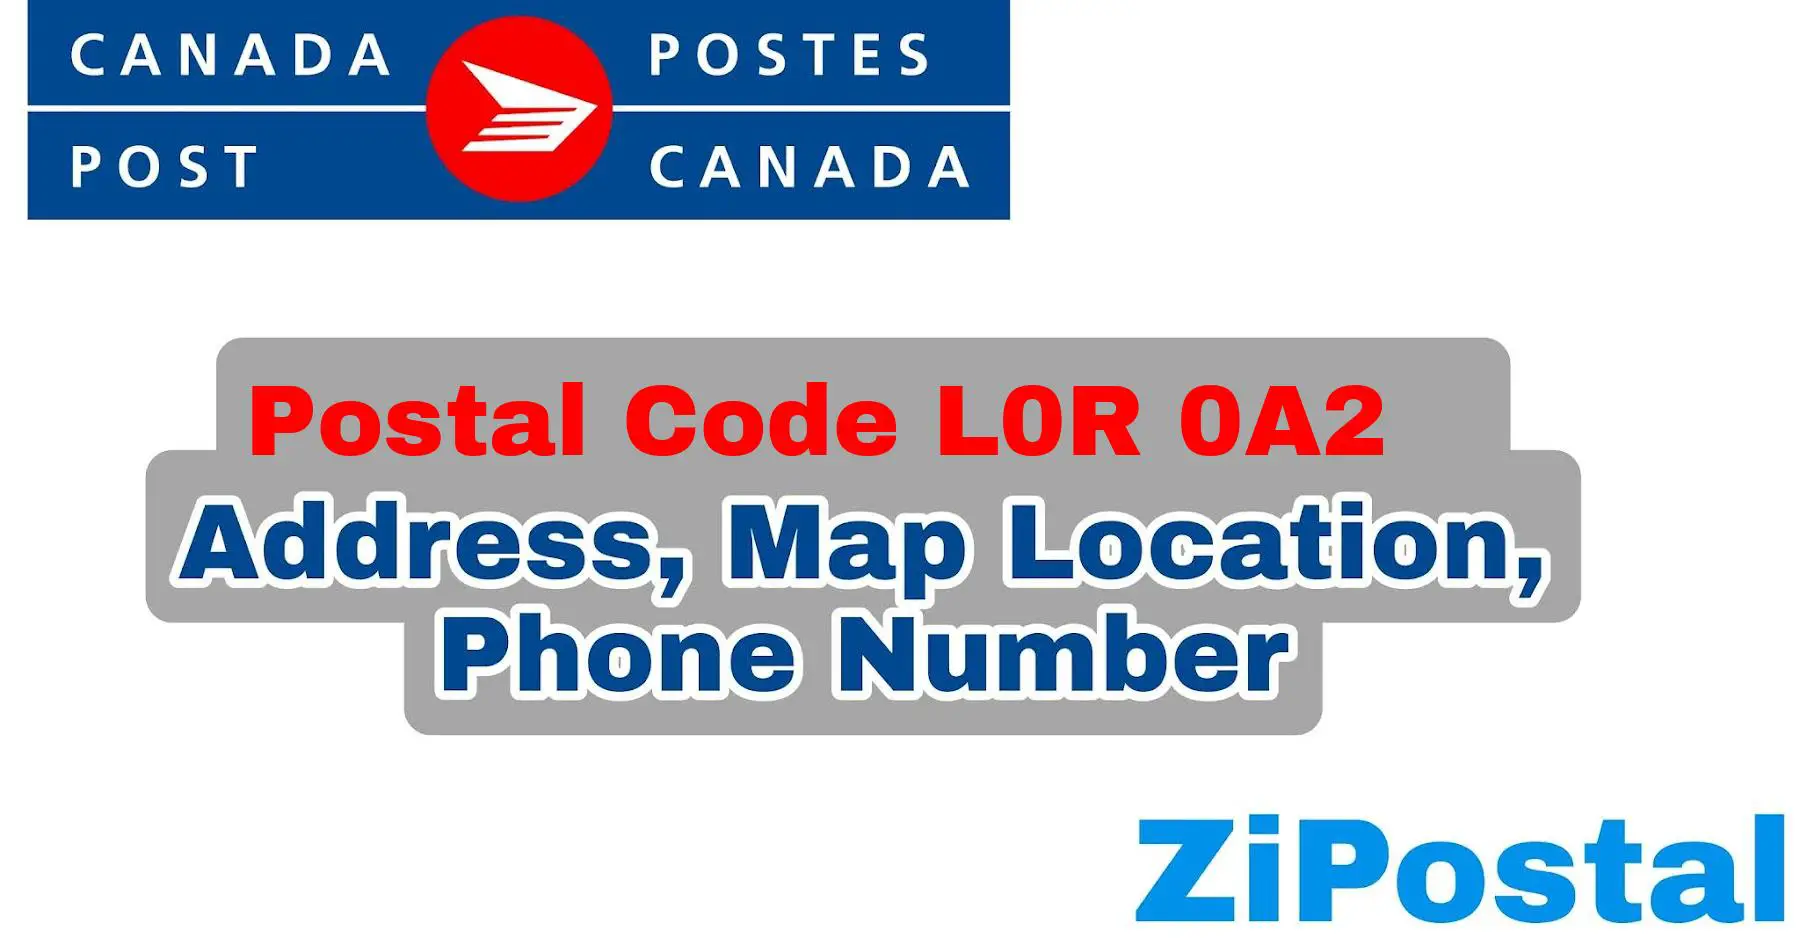 Postal Code L0R 0A2 Address Map Location and Phone Number